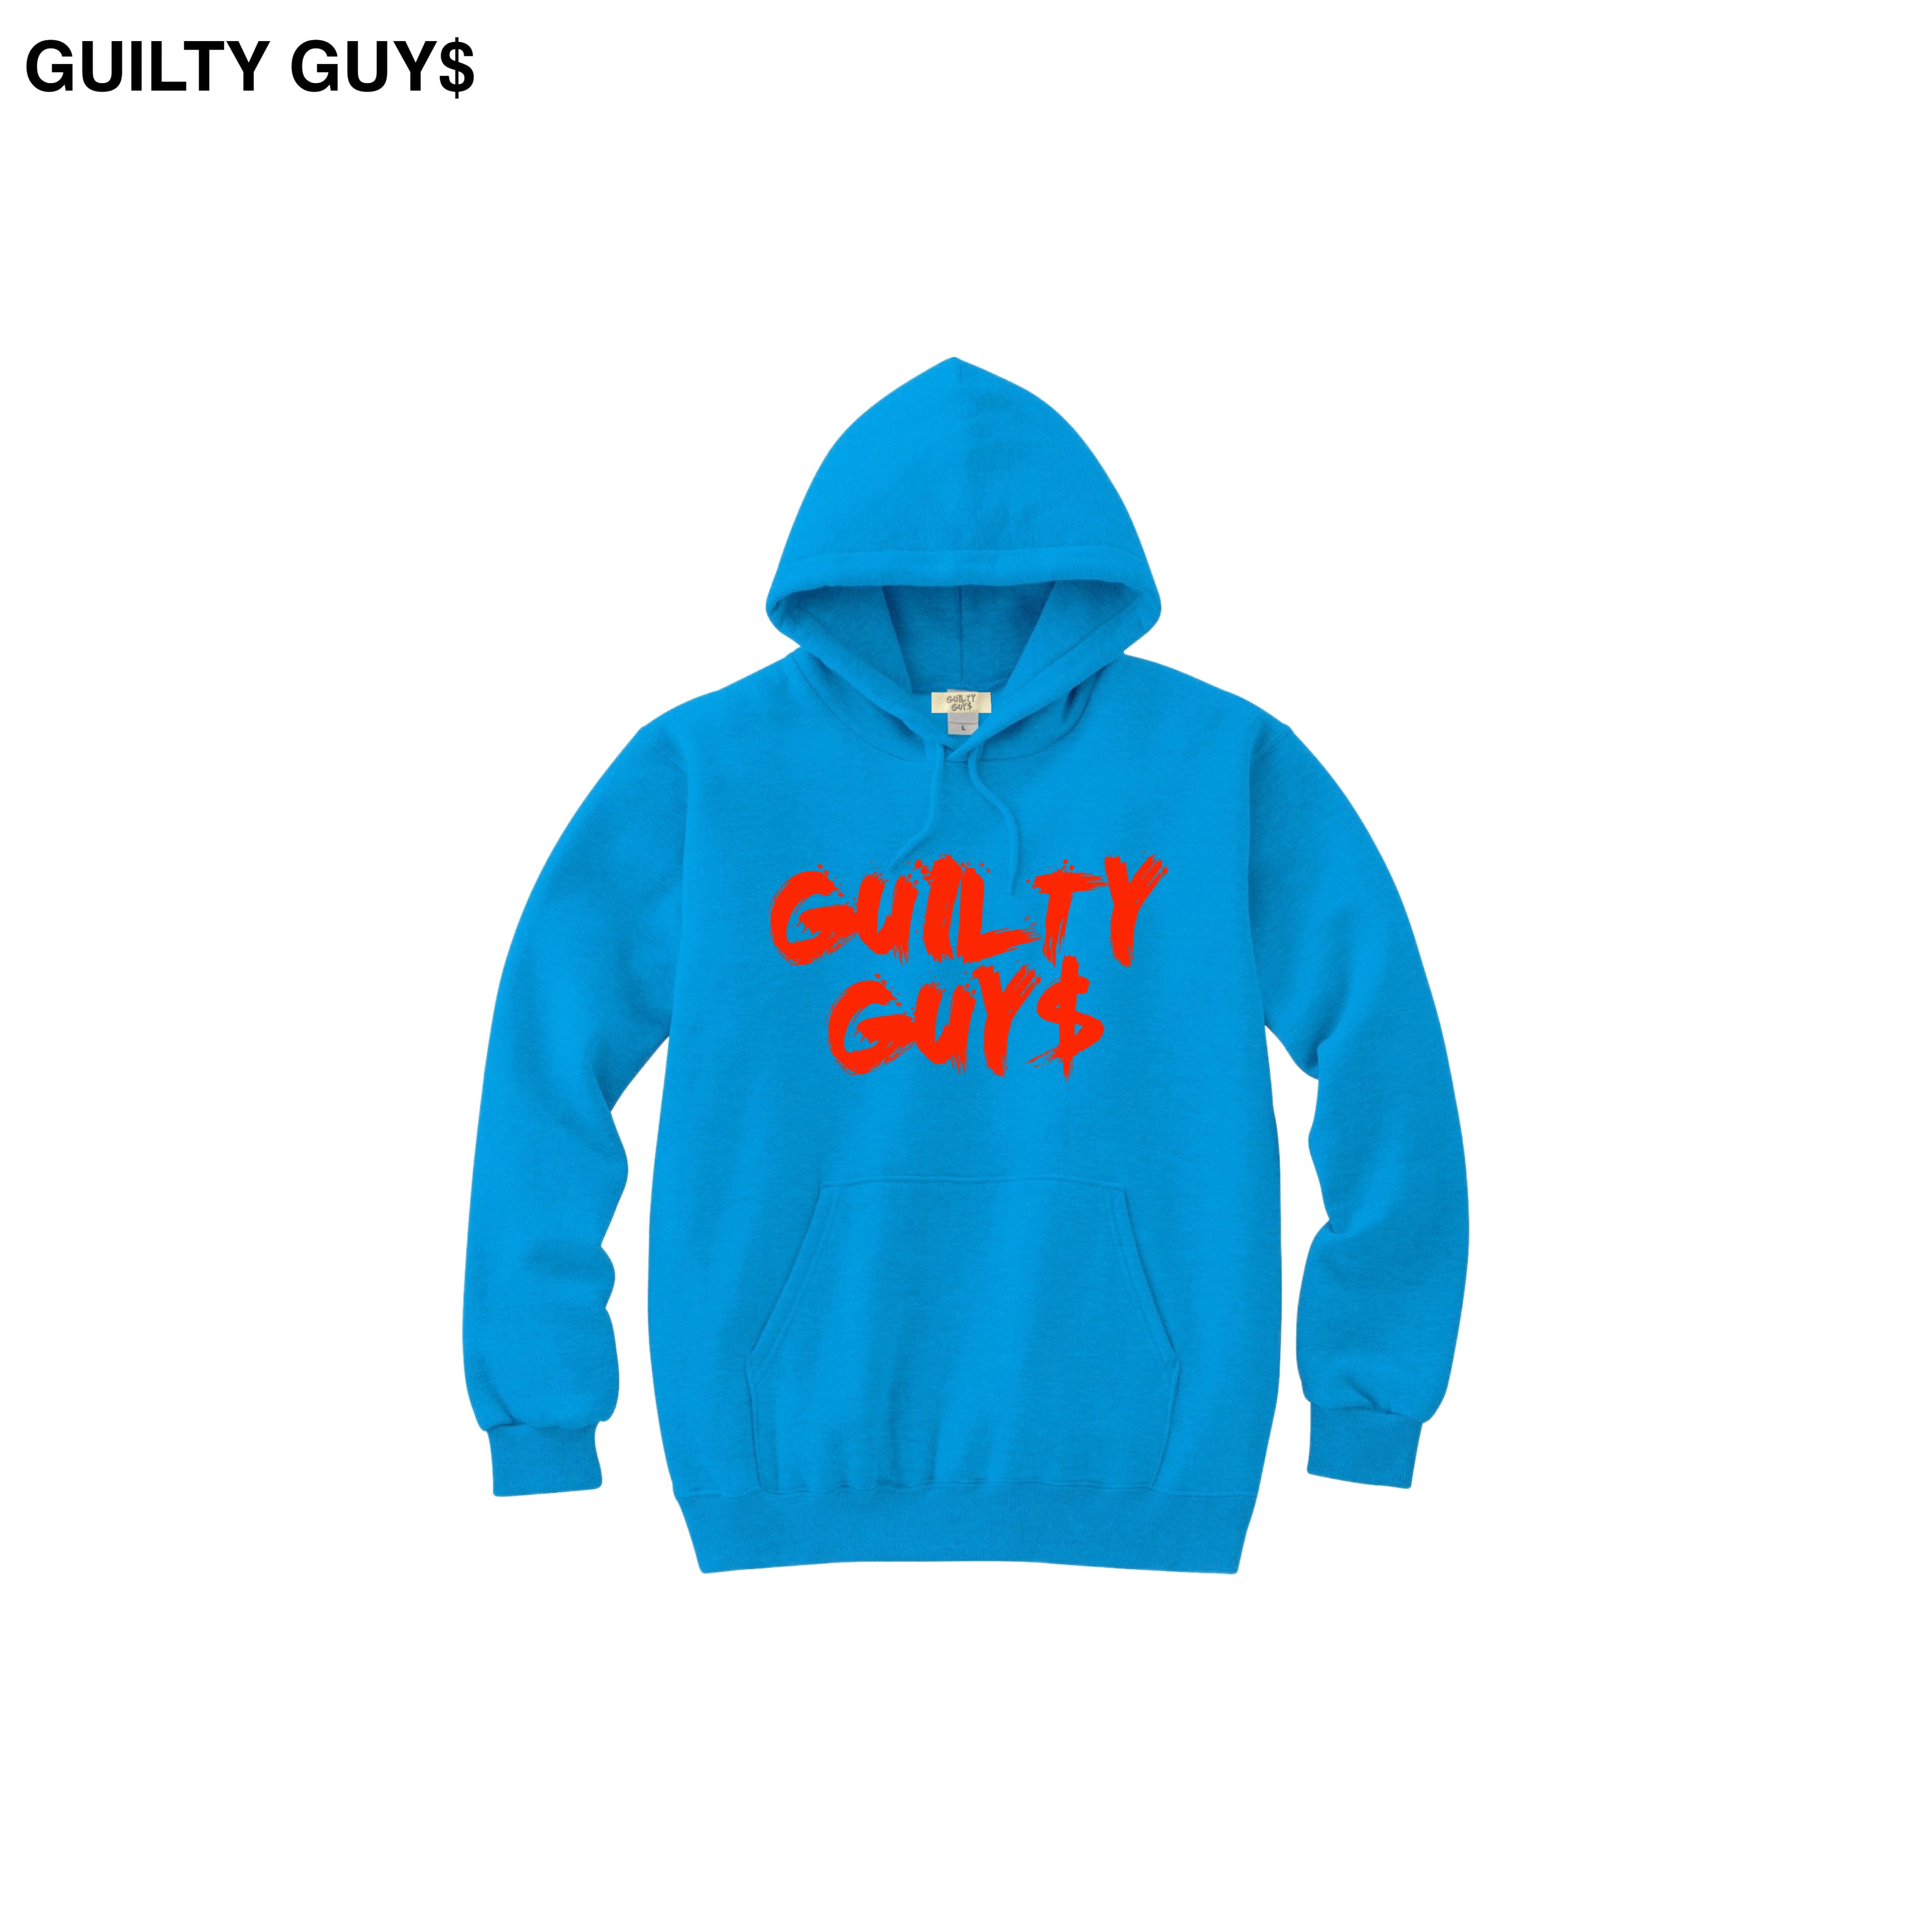 GUILTY GUYS セットアップ 誠実 - セットアップ